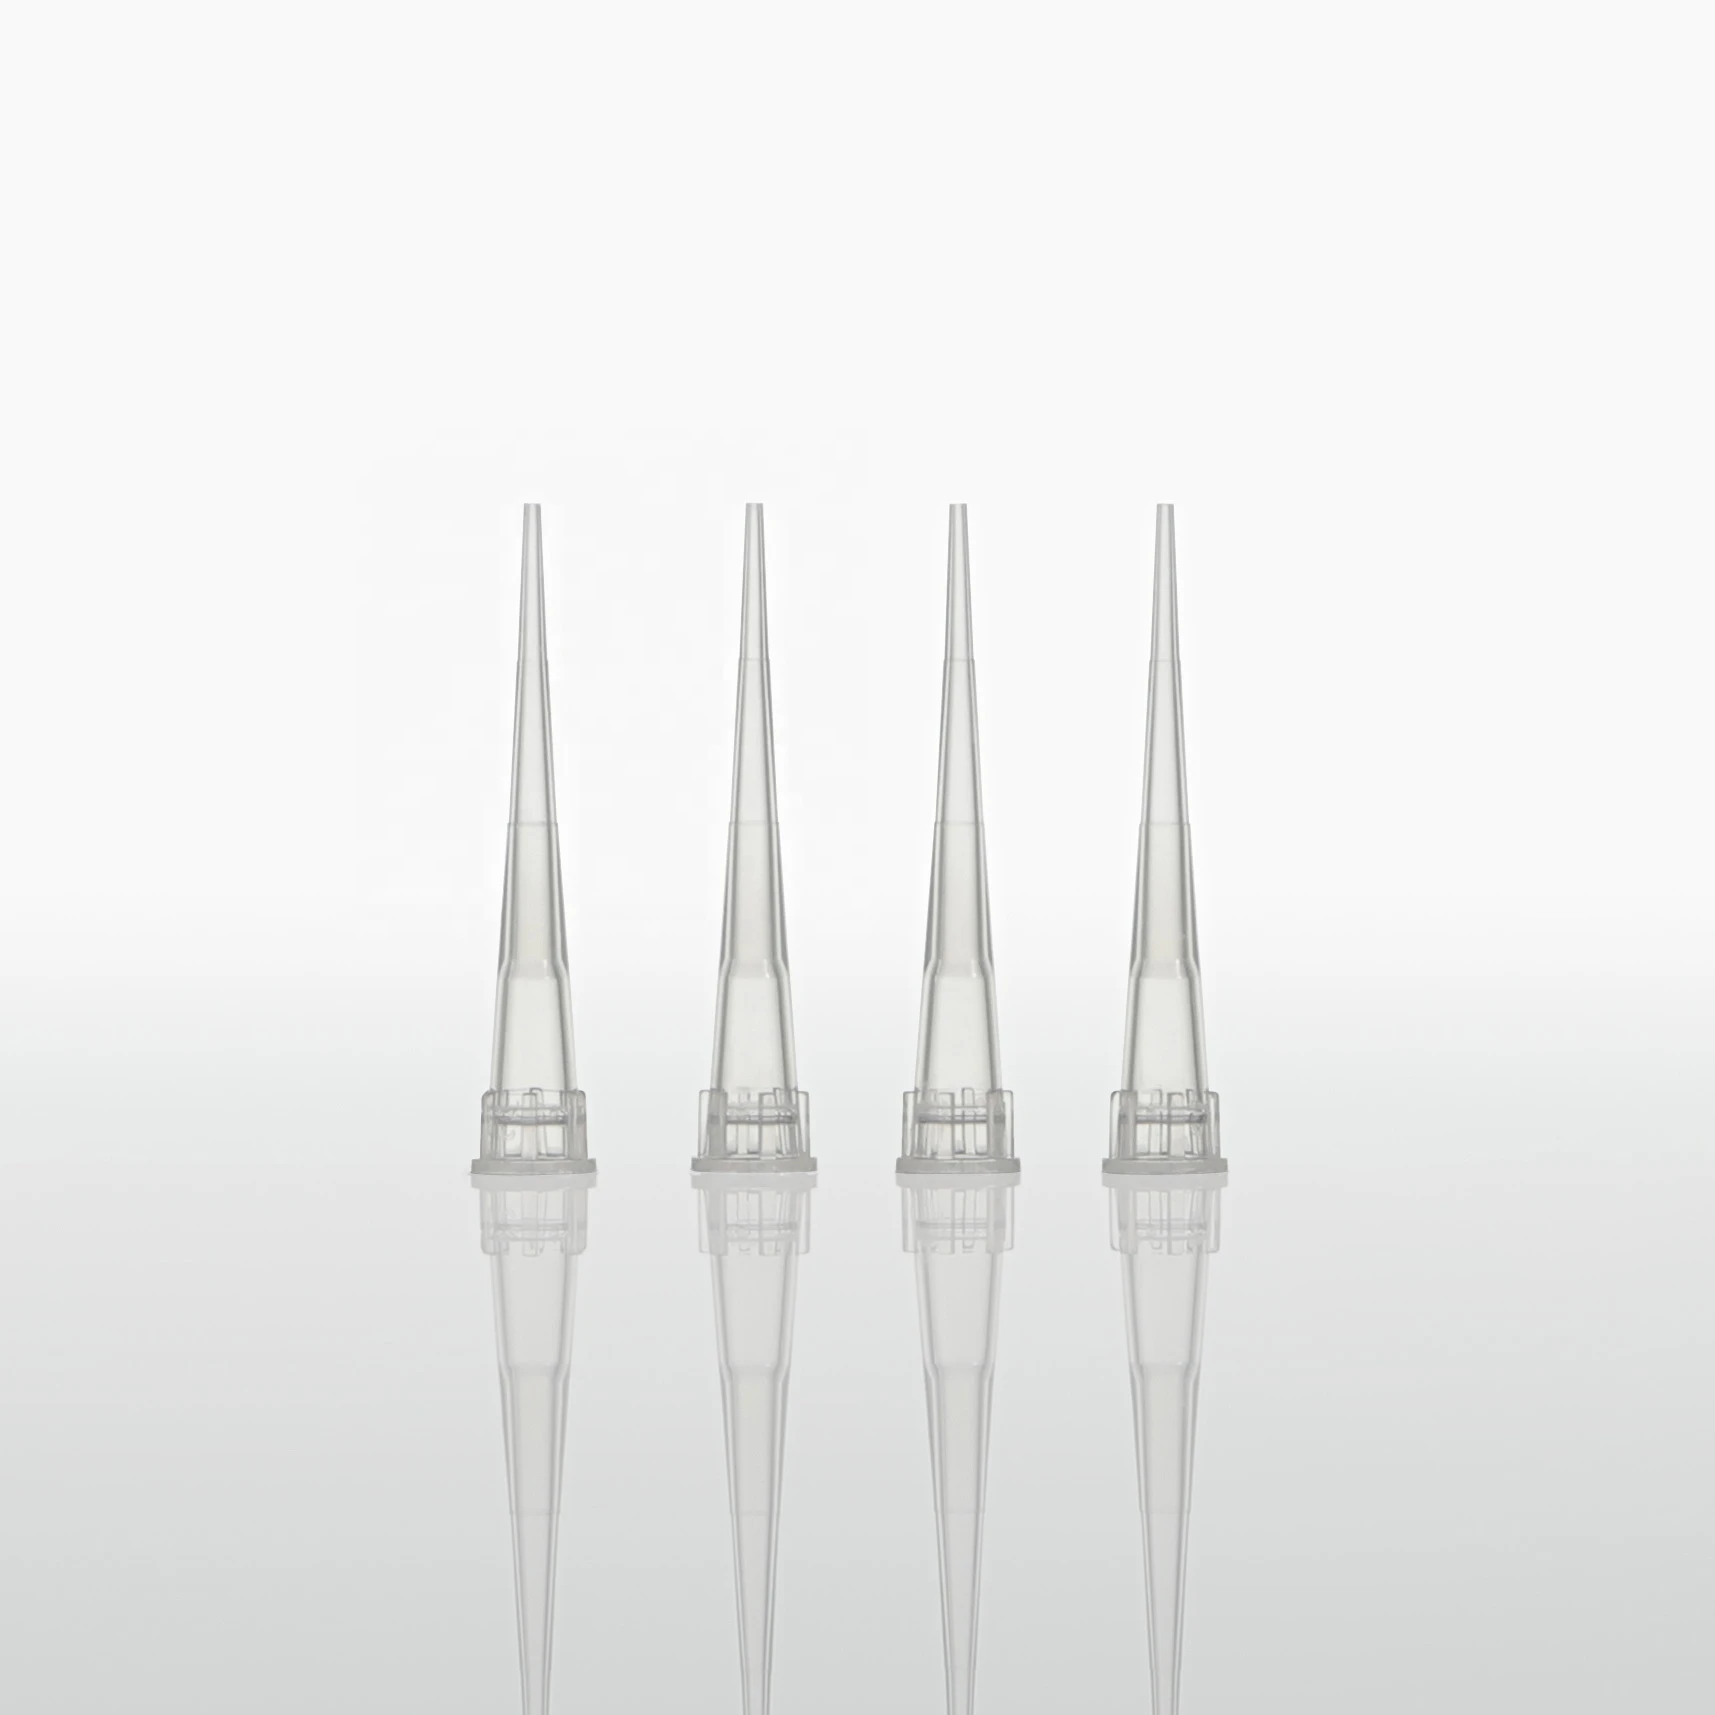 lab equipment 10ul longer bagged Adjustable Pipette tips  Laboratory use other lab supplies